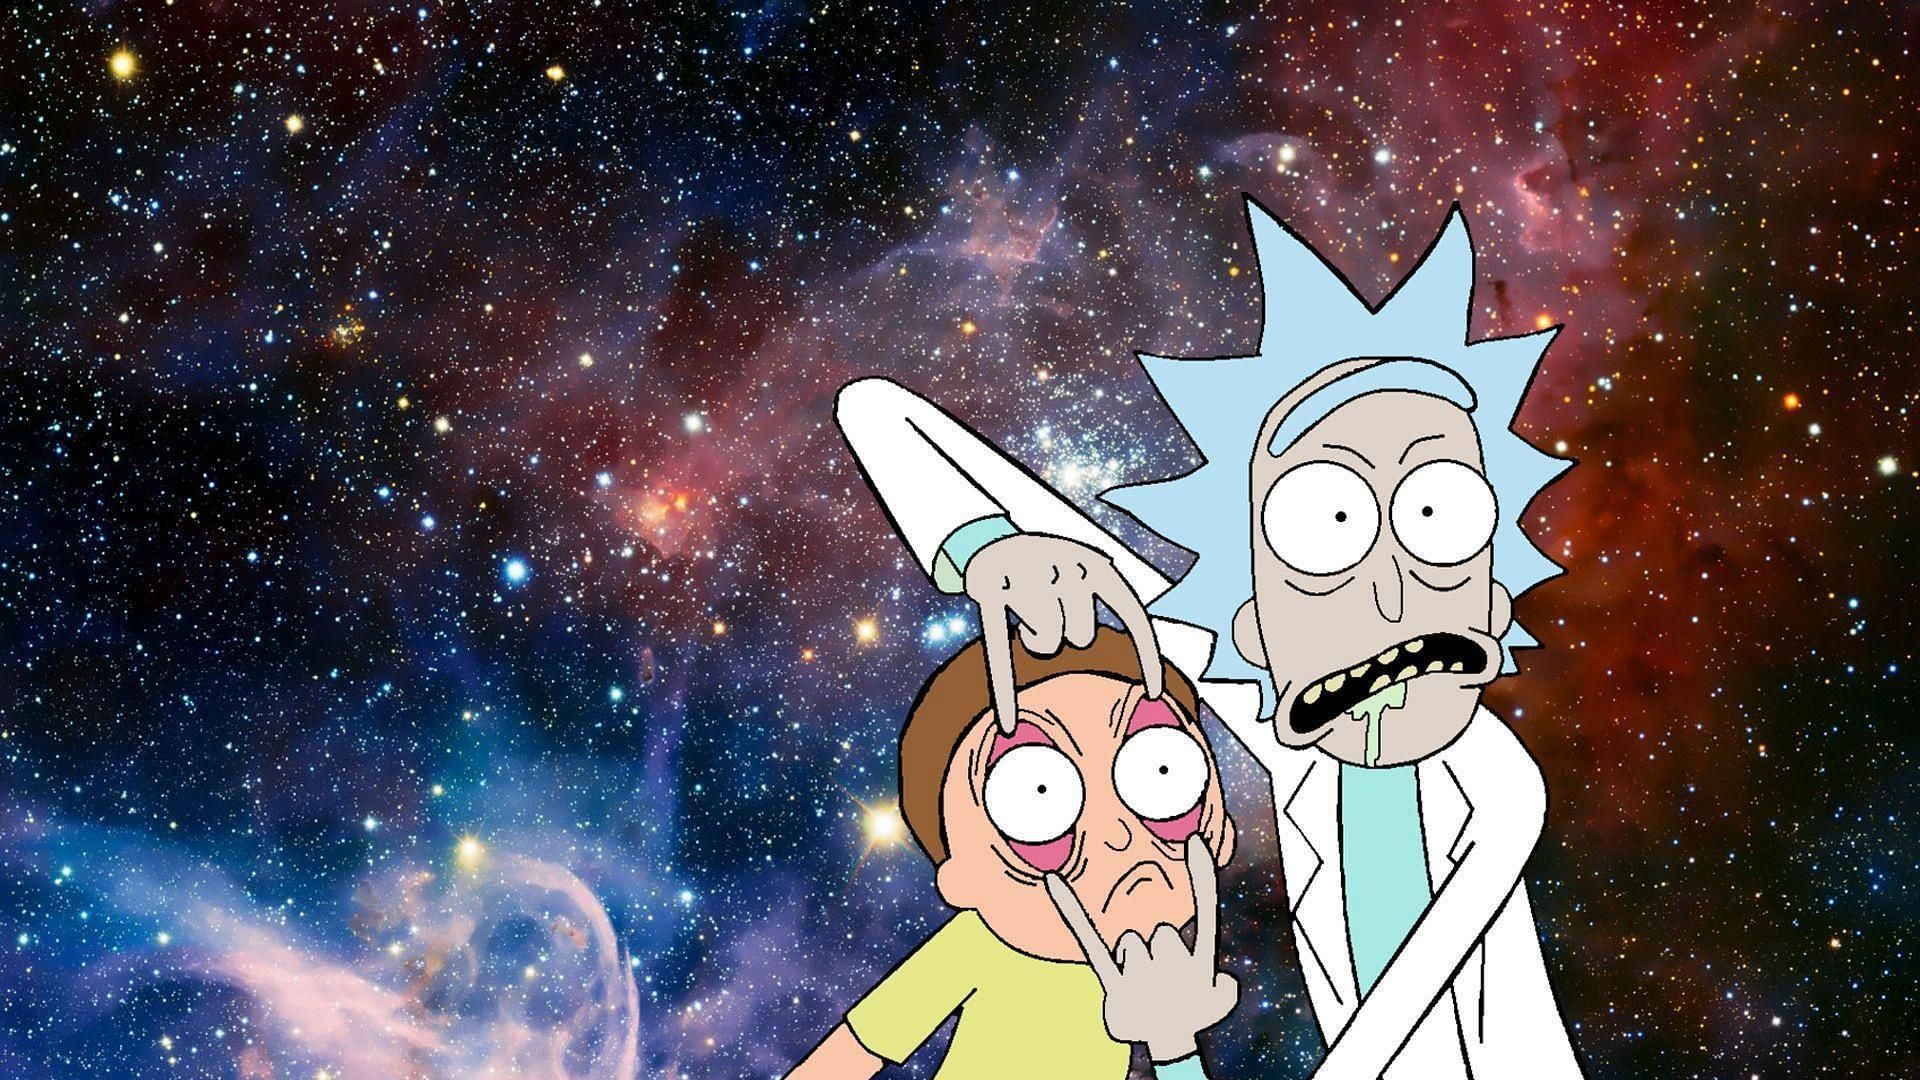 The two protagonists of the series are two characters, Rick and his grandson Morty. (Image via Adult Swim)